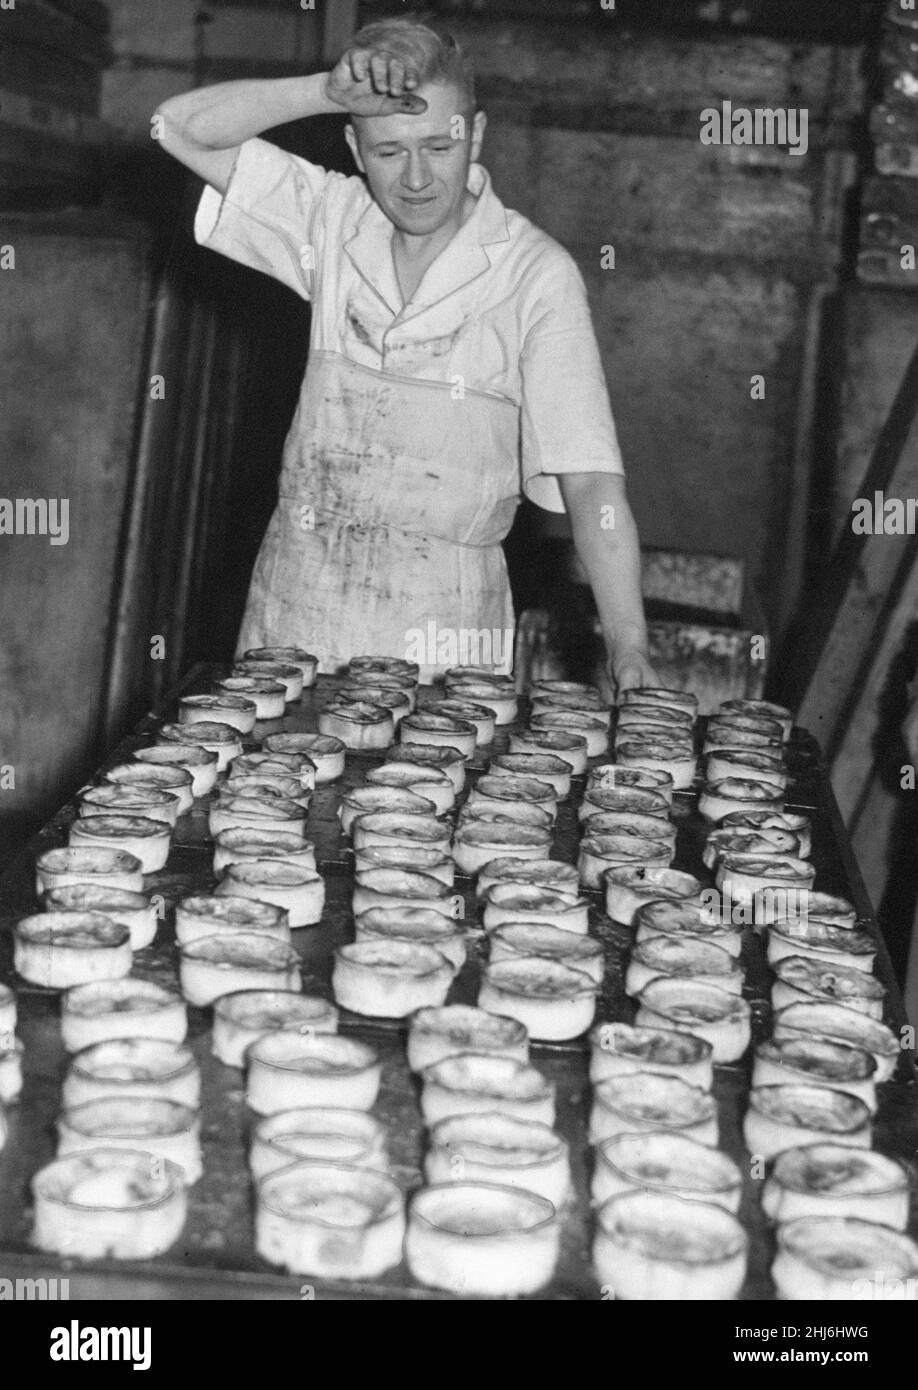 Bakers finish pies, ready for delivery at busy Edinburgh Bakery, Friday 1st February 1957.  Extra supplies are anticipated with large crowds expected  for three matches in the city this Saturday, cafes and restaurants are sure to be busy.   Scottish FA Cup Fifth round matches Hibernian v Aberdeen,  Heart of Midlothian v Rangers and Edinburgh FC v TBC? Stock Photo